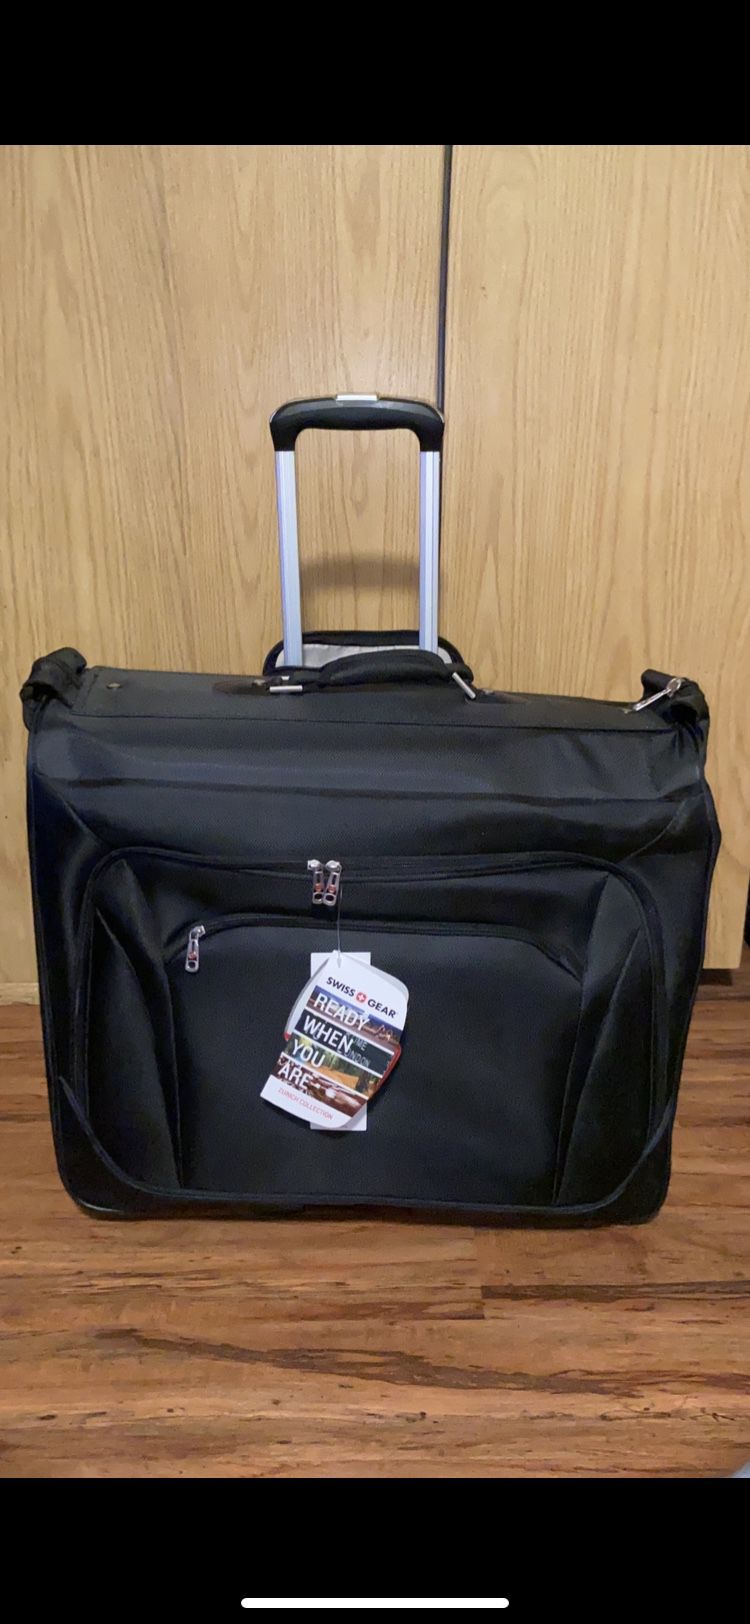  SWISS GEAR PREMIUM ROLLING LUGGAGE/ BAG WITH WHEELS